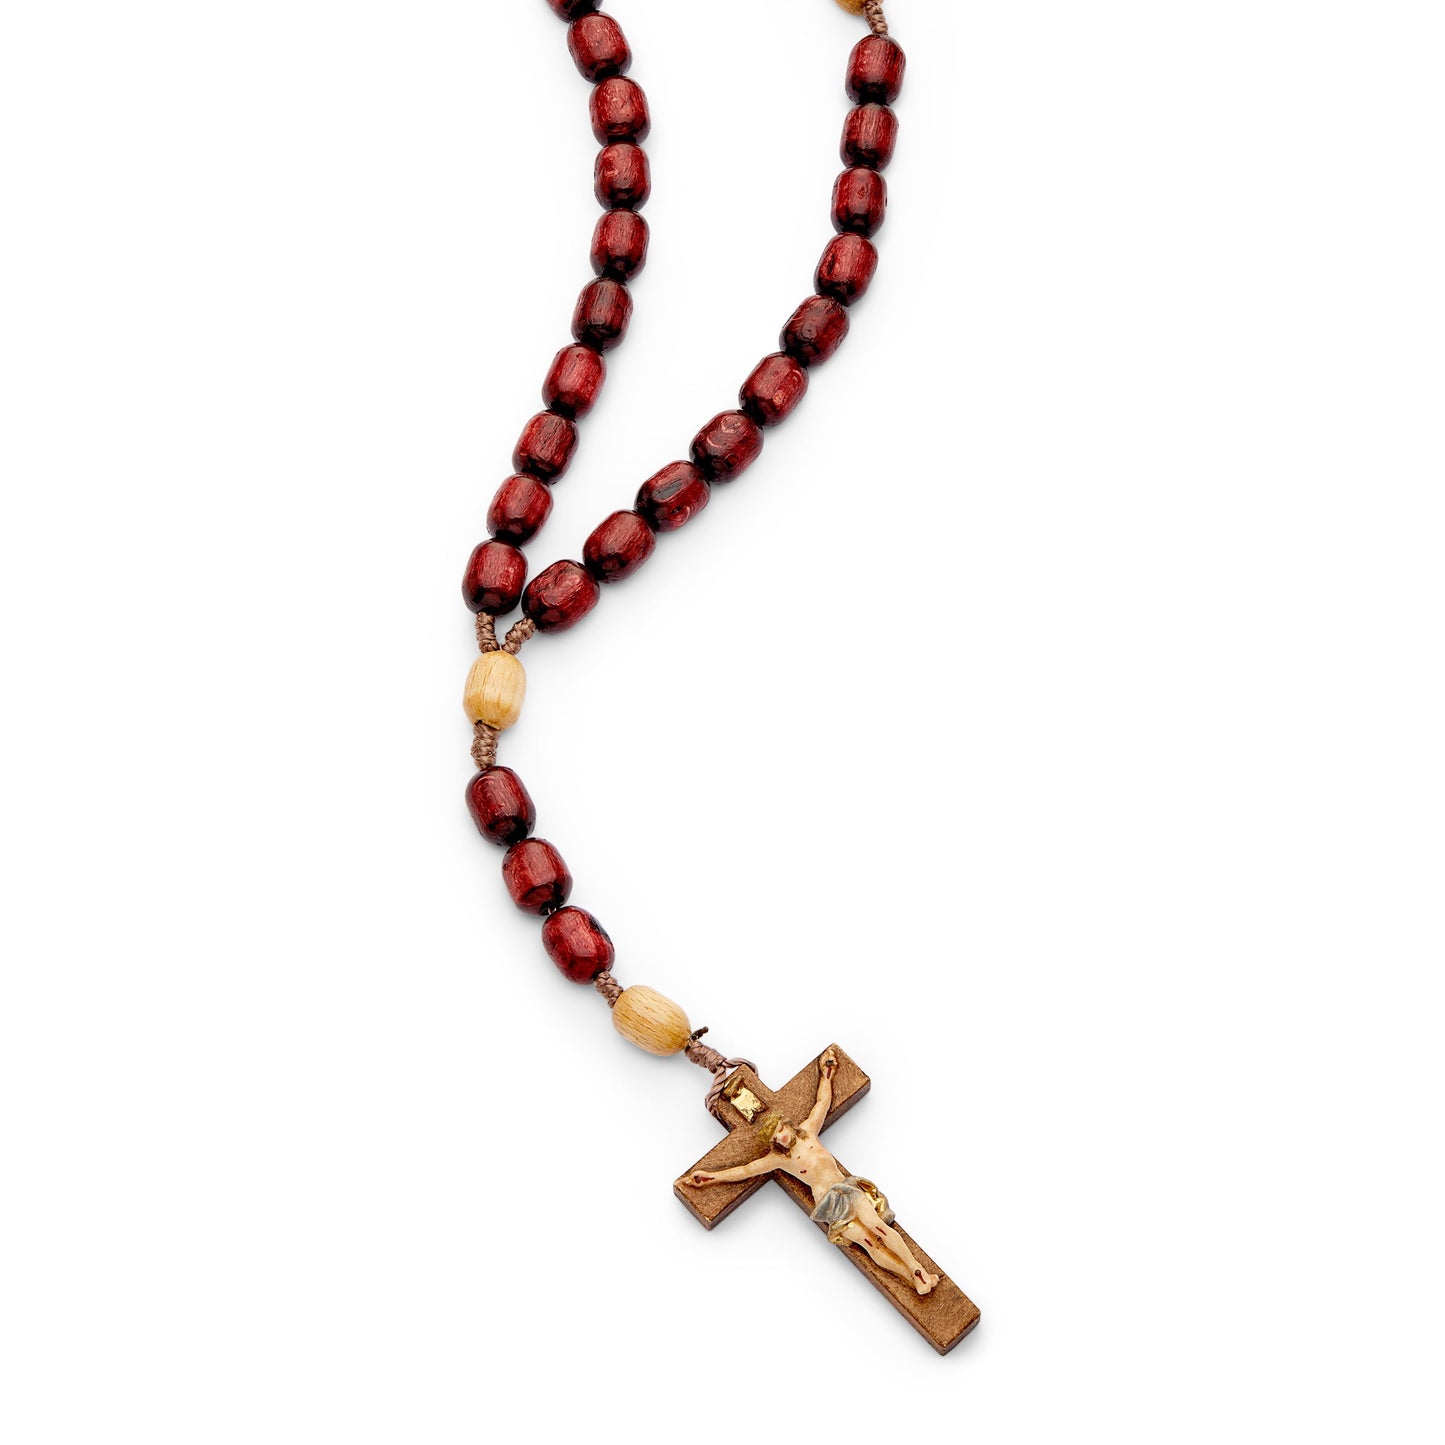 MONDO CATTOLICO Prayer Beads 50 cm (19.68 in) / 10 mm (0.39 in) Wooden Rosary with handcarved Crucifix